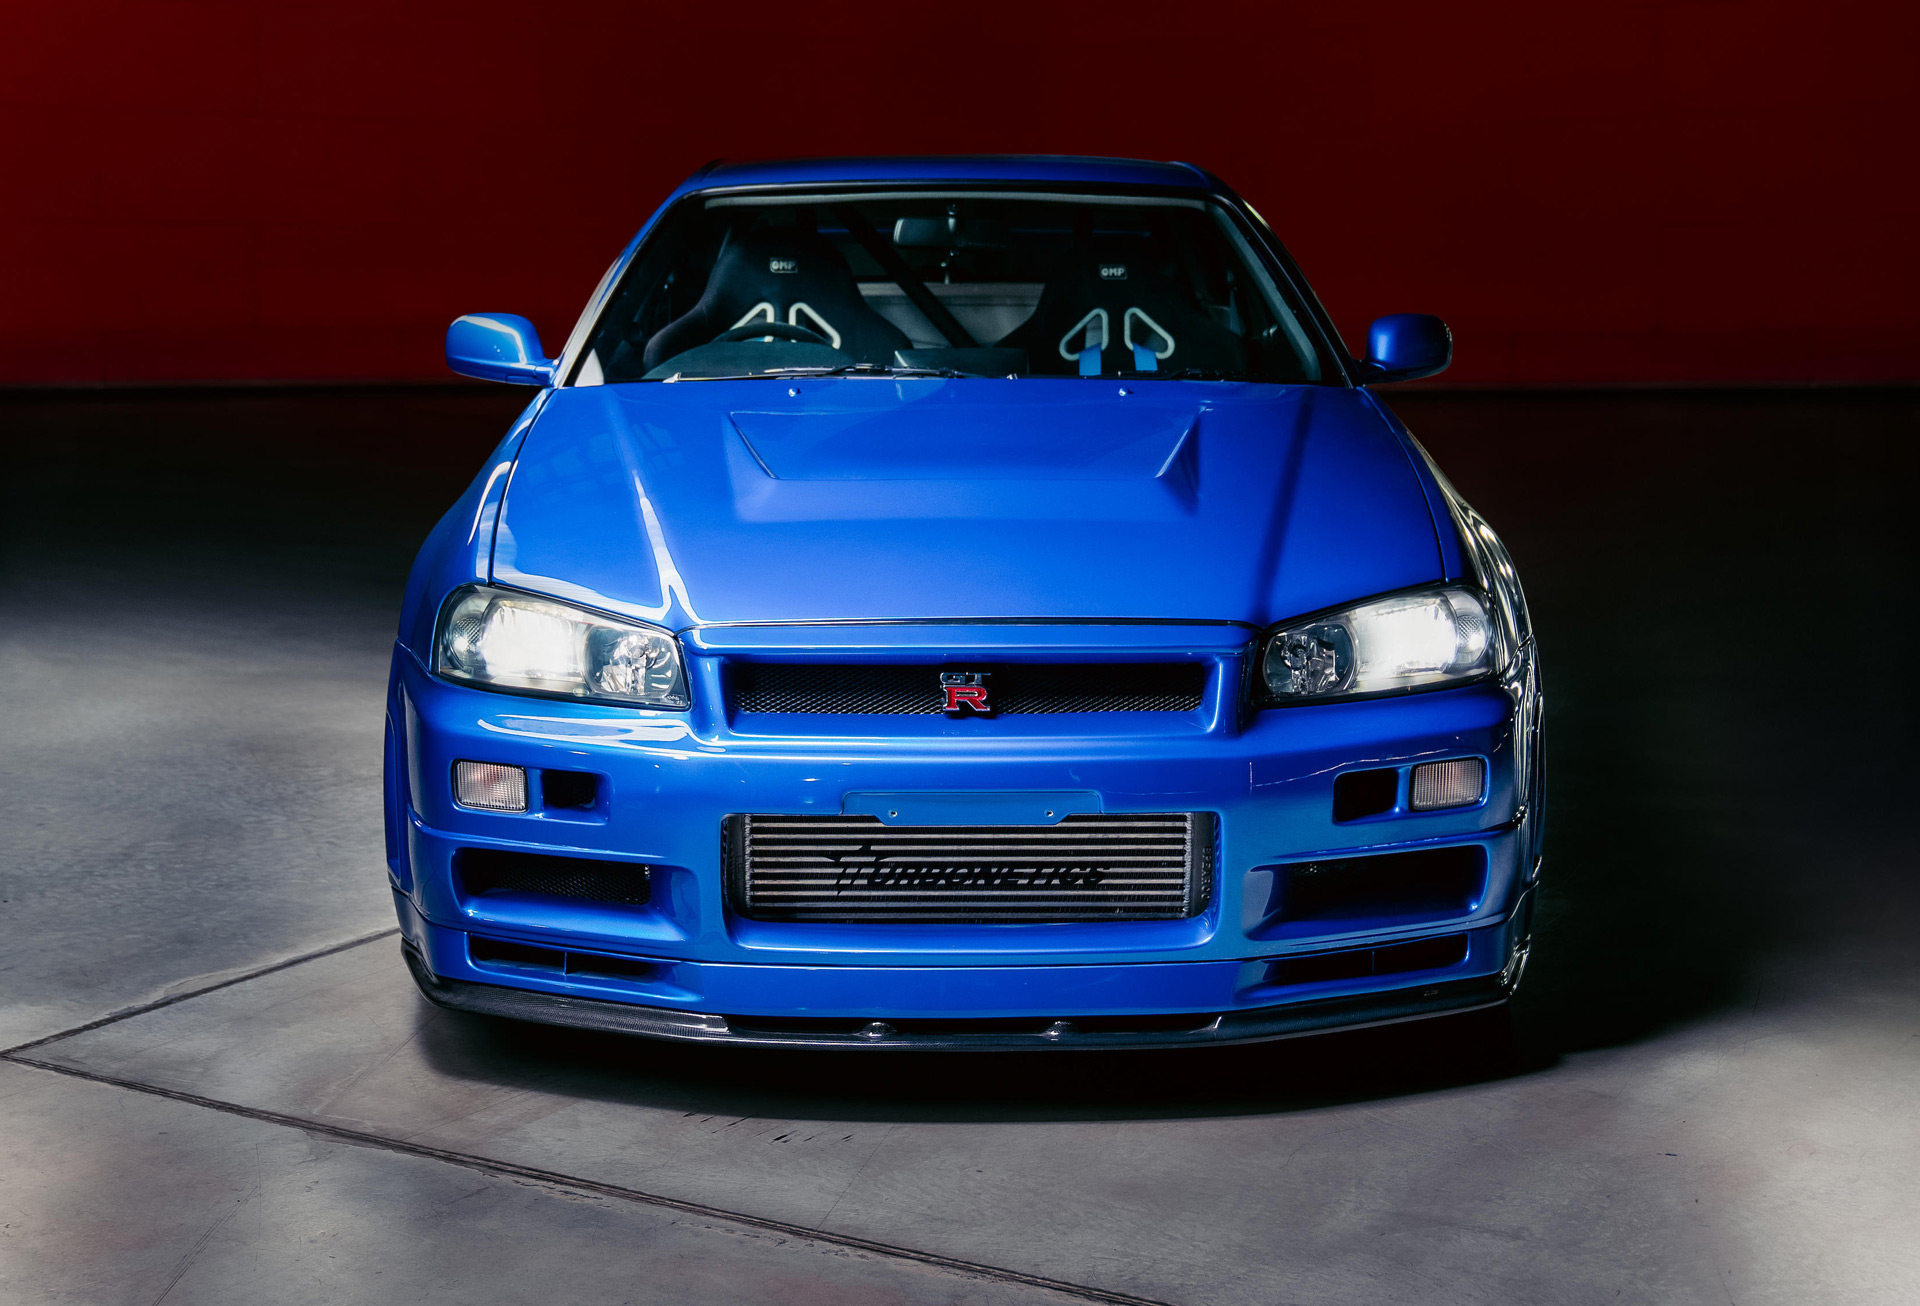 Nissan Skyline GT-R driven by Paul Walker sells for $1.35M Auto Recent